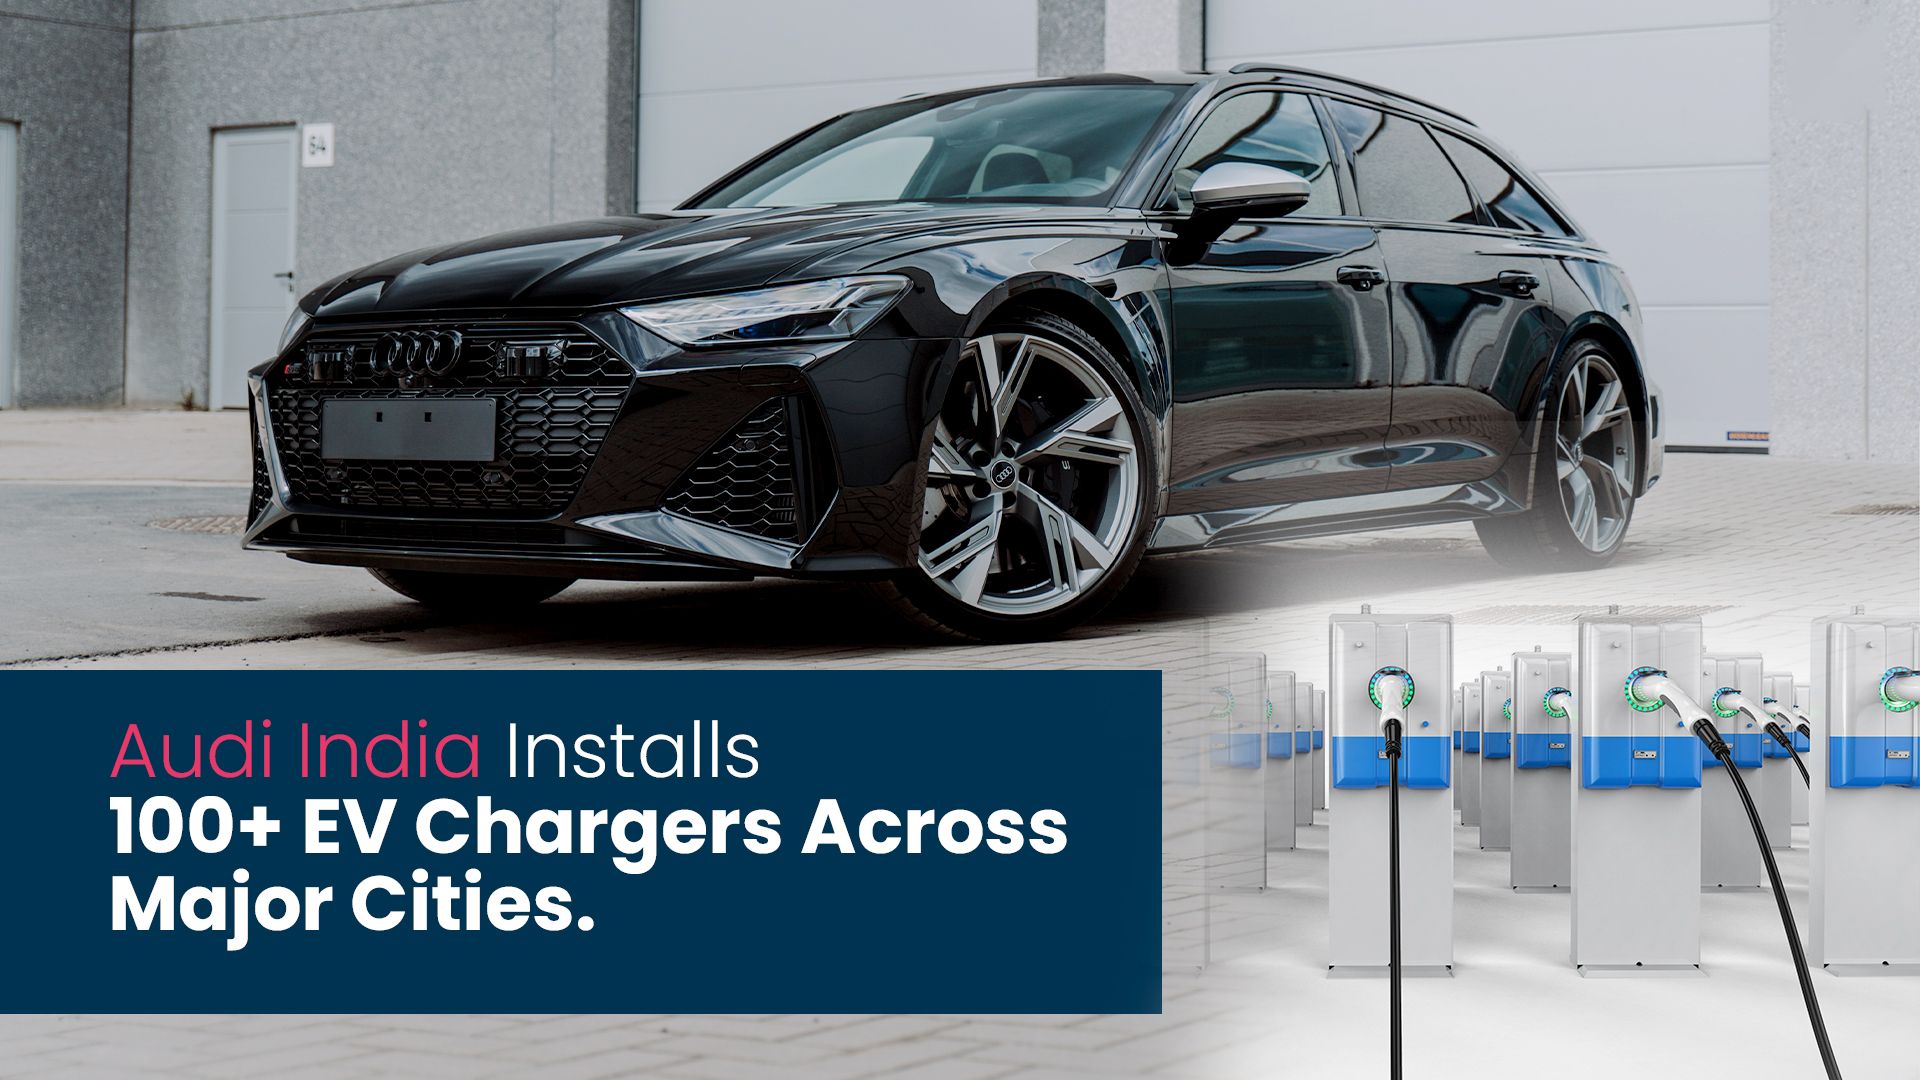 Audi India Instals 100+ EV Chargers Across Major Cities In The Country.